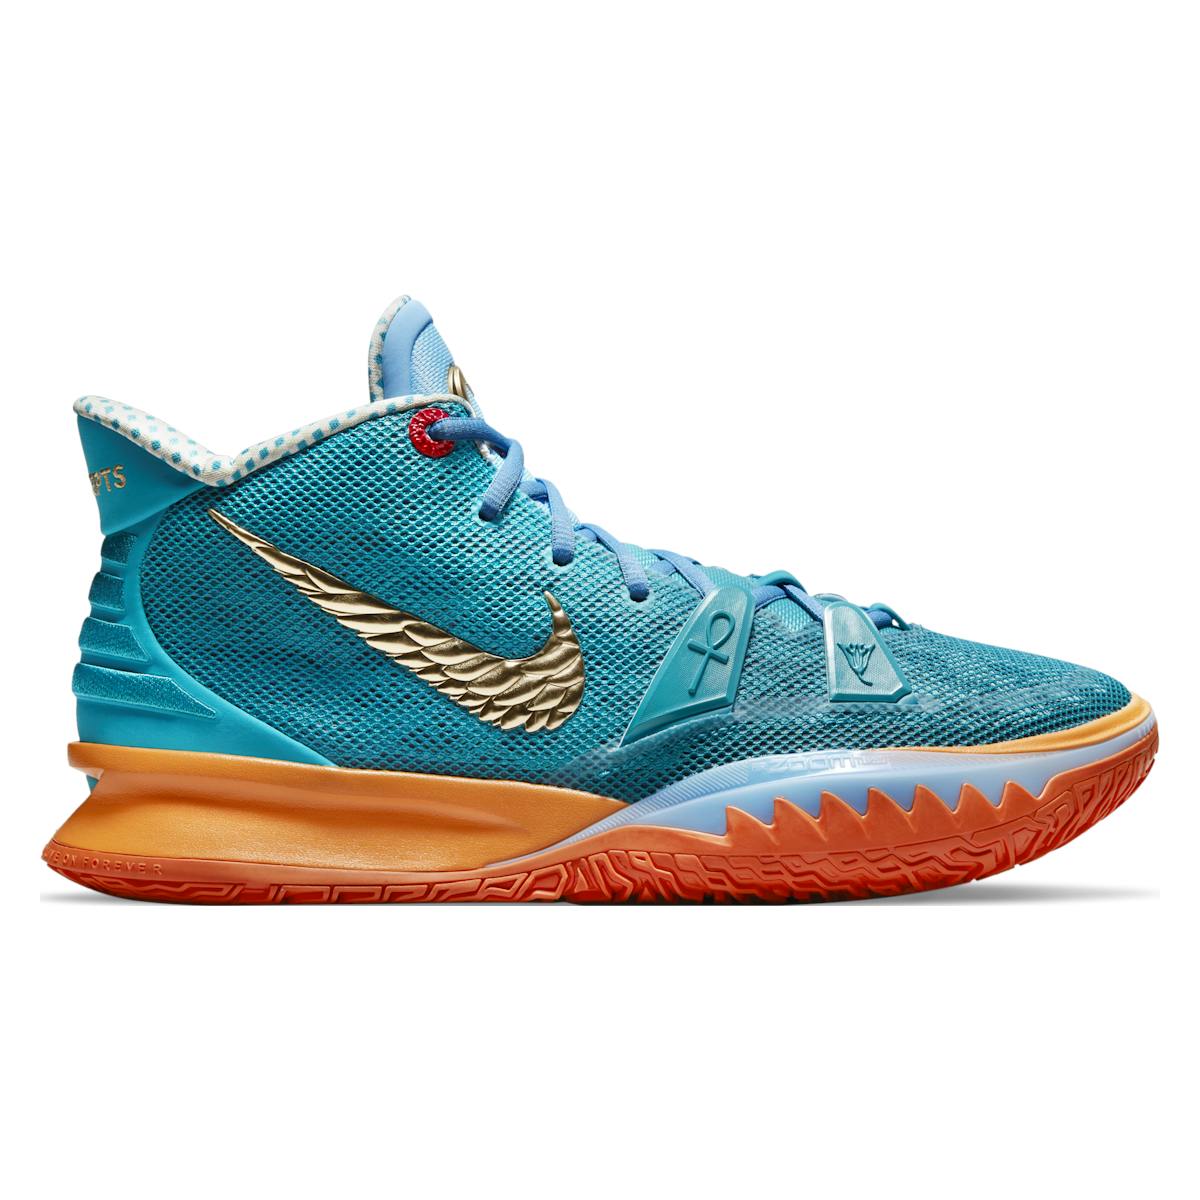 Nike x Concepts Kyrie 7